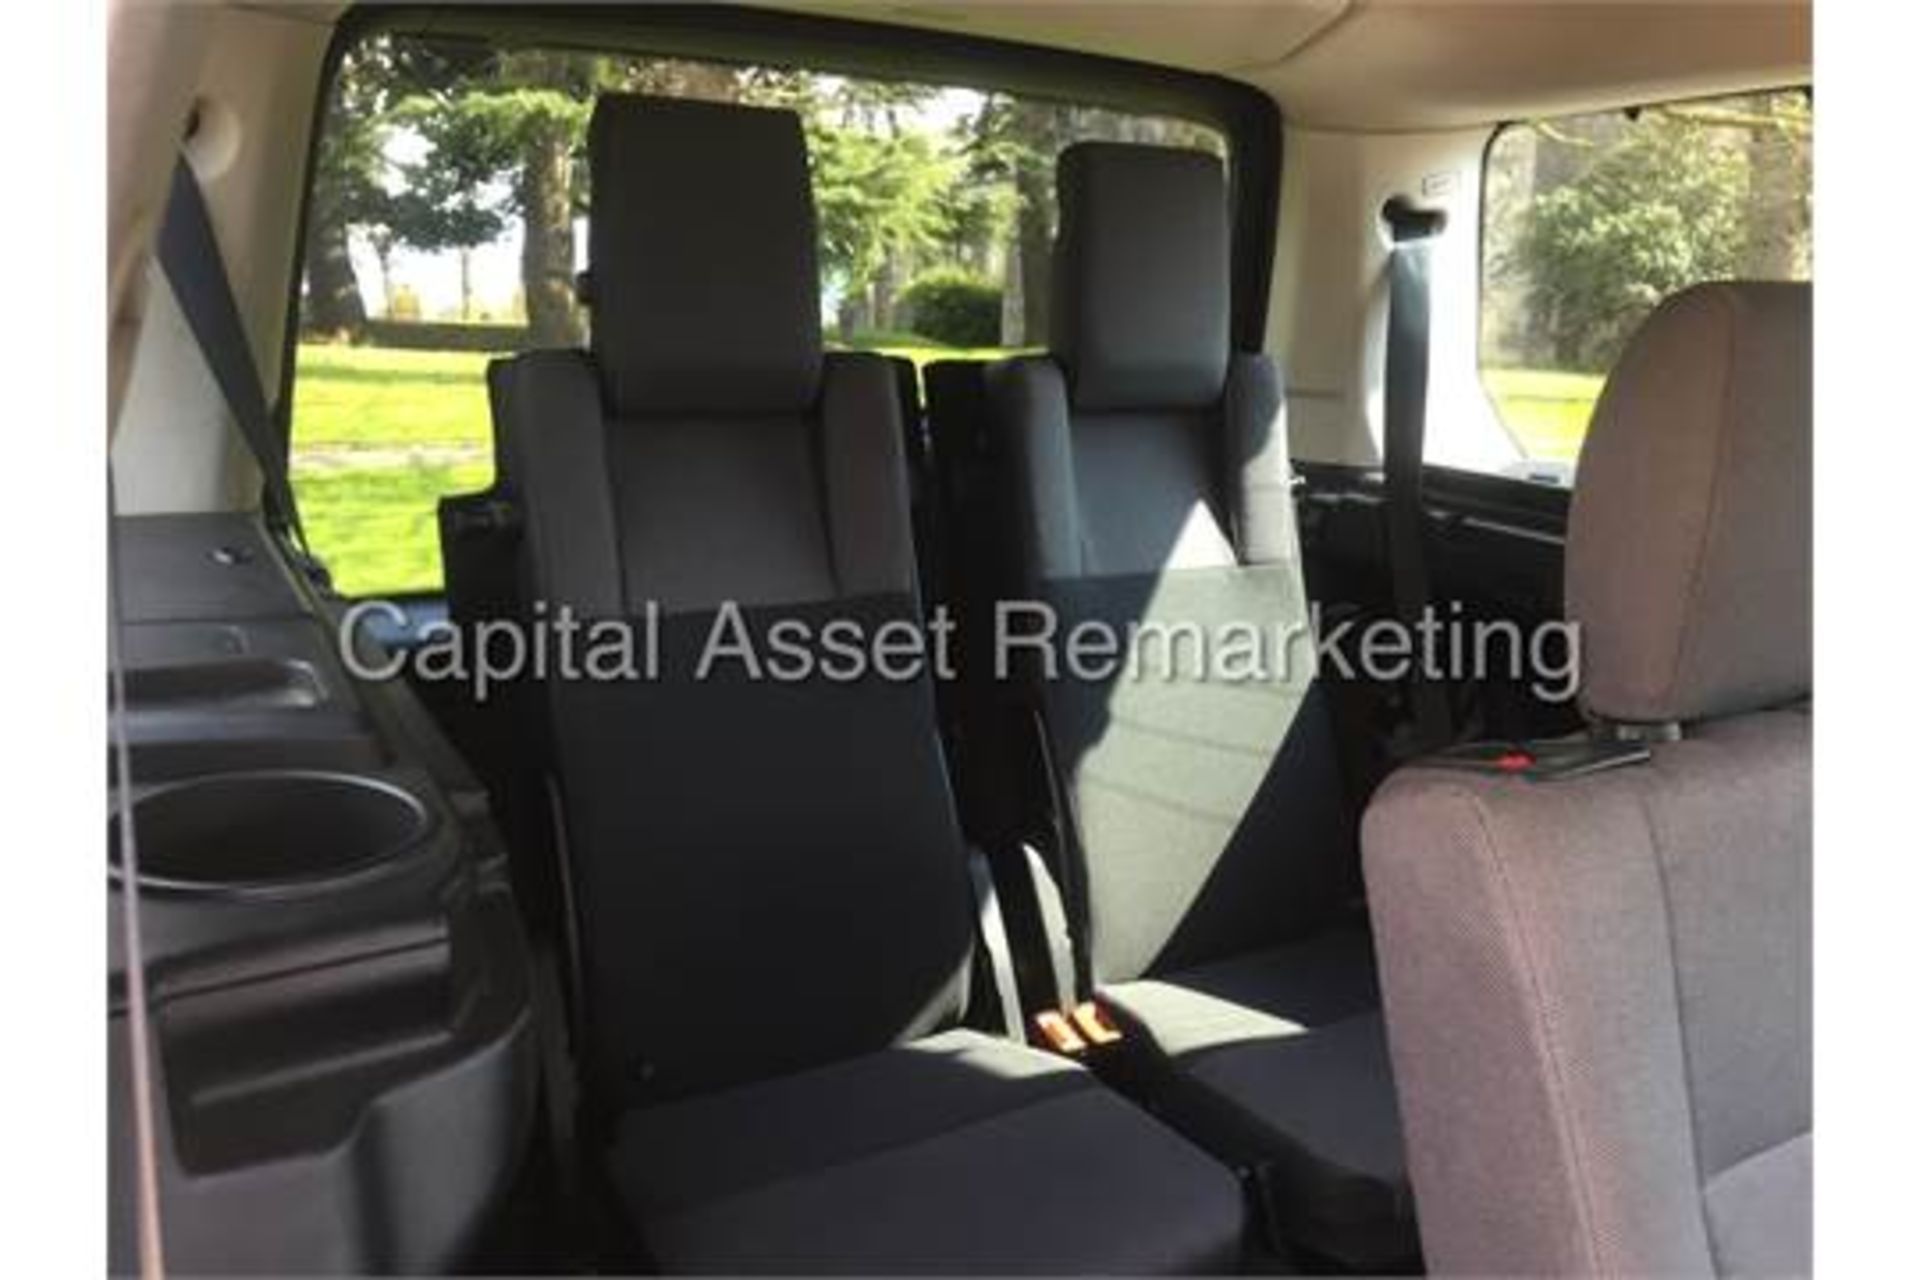 (On Sale) LAND ROVER DISCOVERY 3 (2009) 2.7 TDV6 - AUTO - 7 SEATER - AIR SUSPENSION (NO VAT) - Image 16 of 29